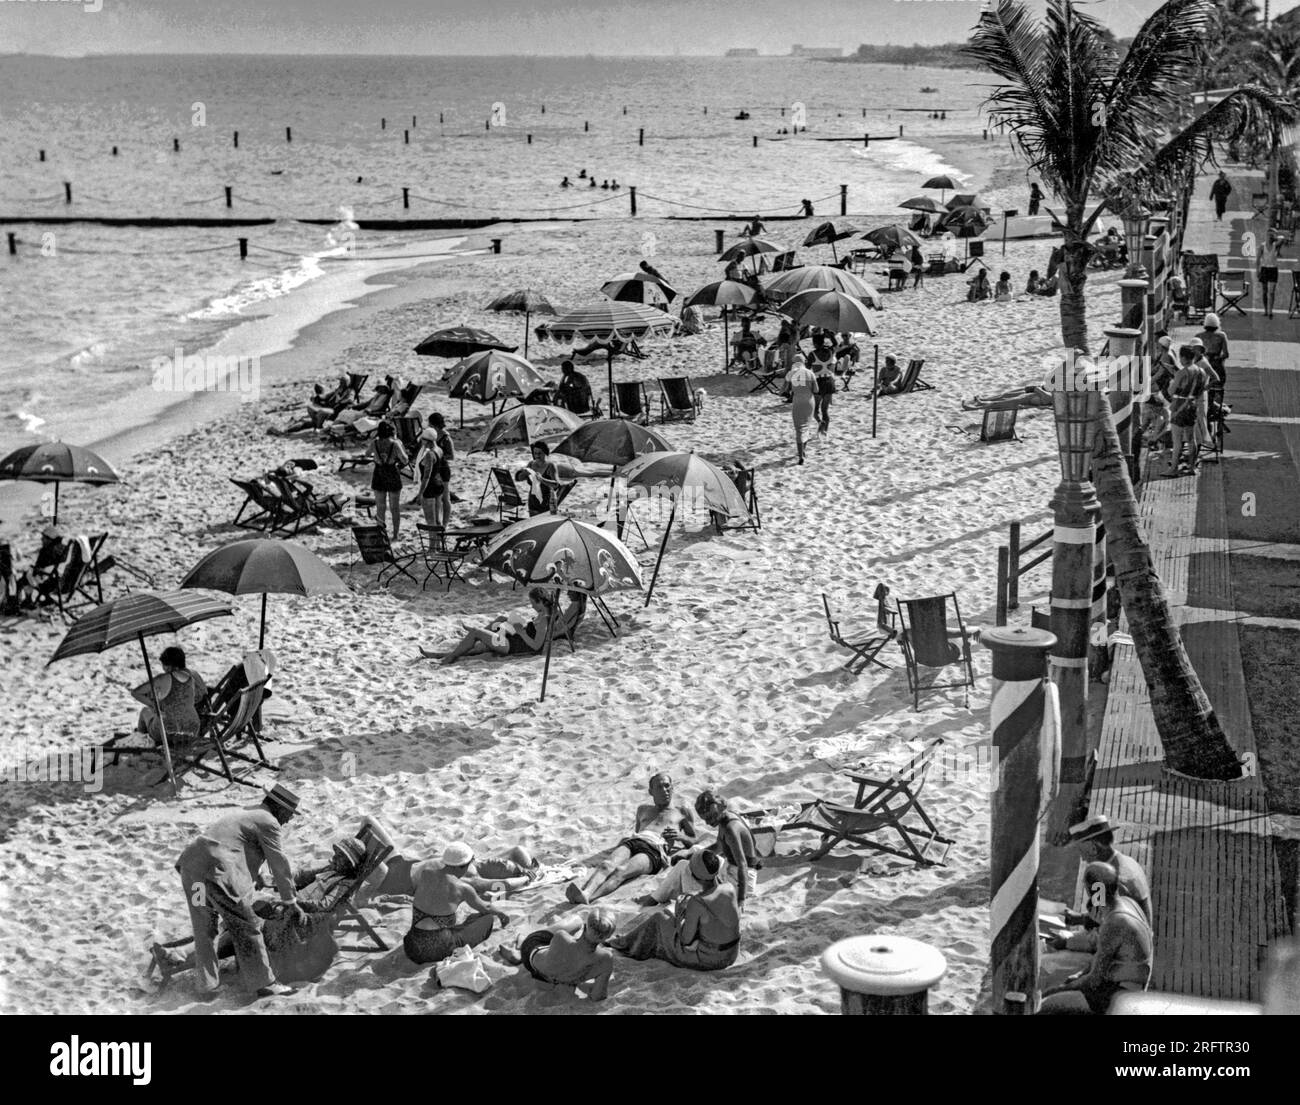 Miami Beach, Florida   c. 1930 Roney Plaza on the beach, a meeting place for the famous. Stock Photo